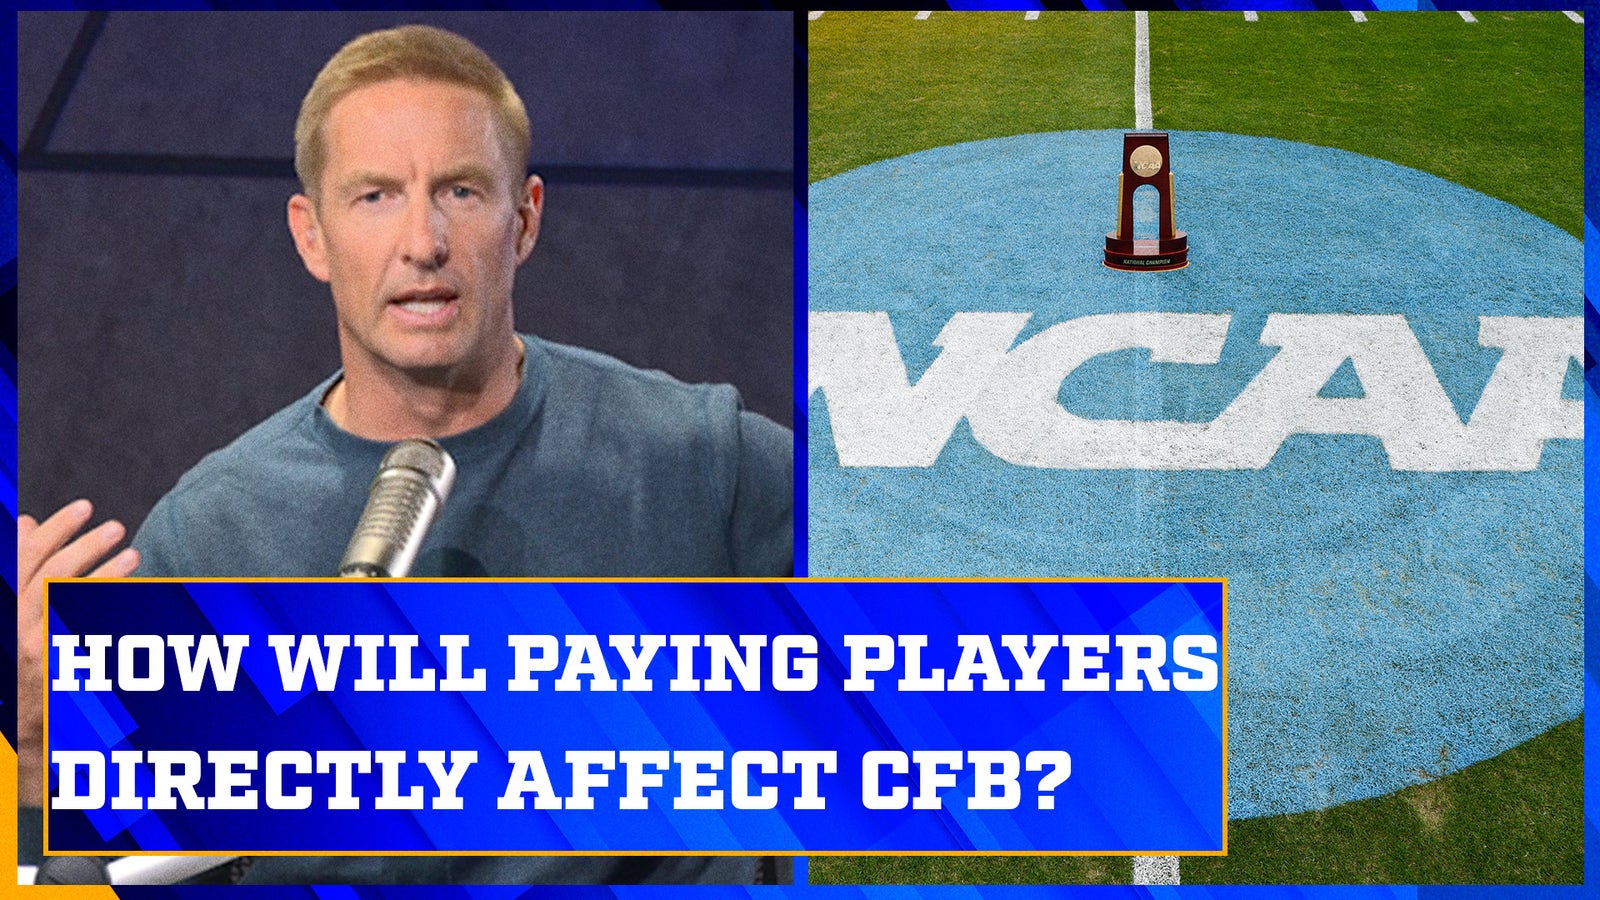 How will paying players directly affect the future of college football?